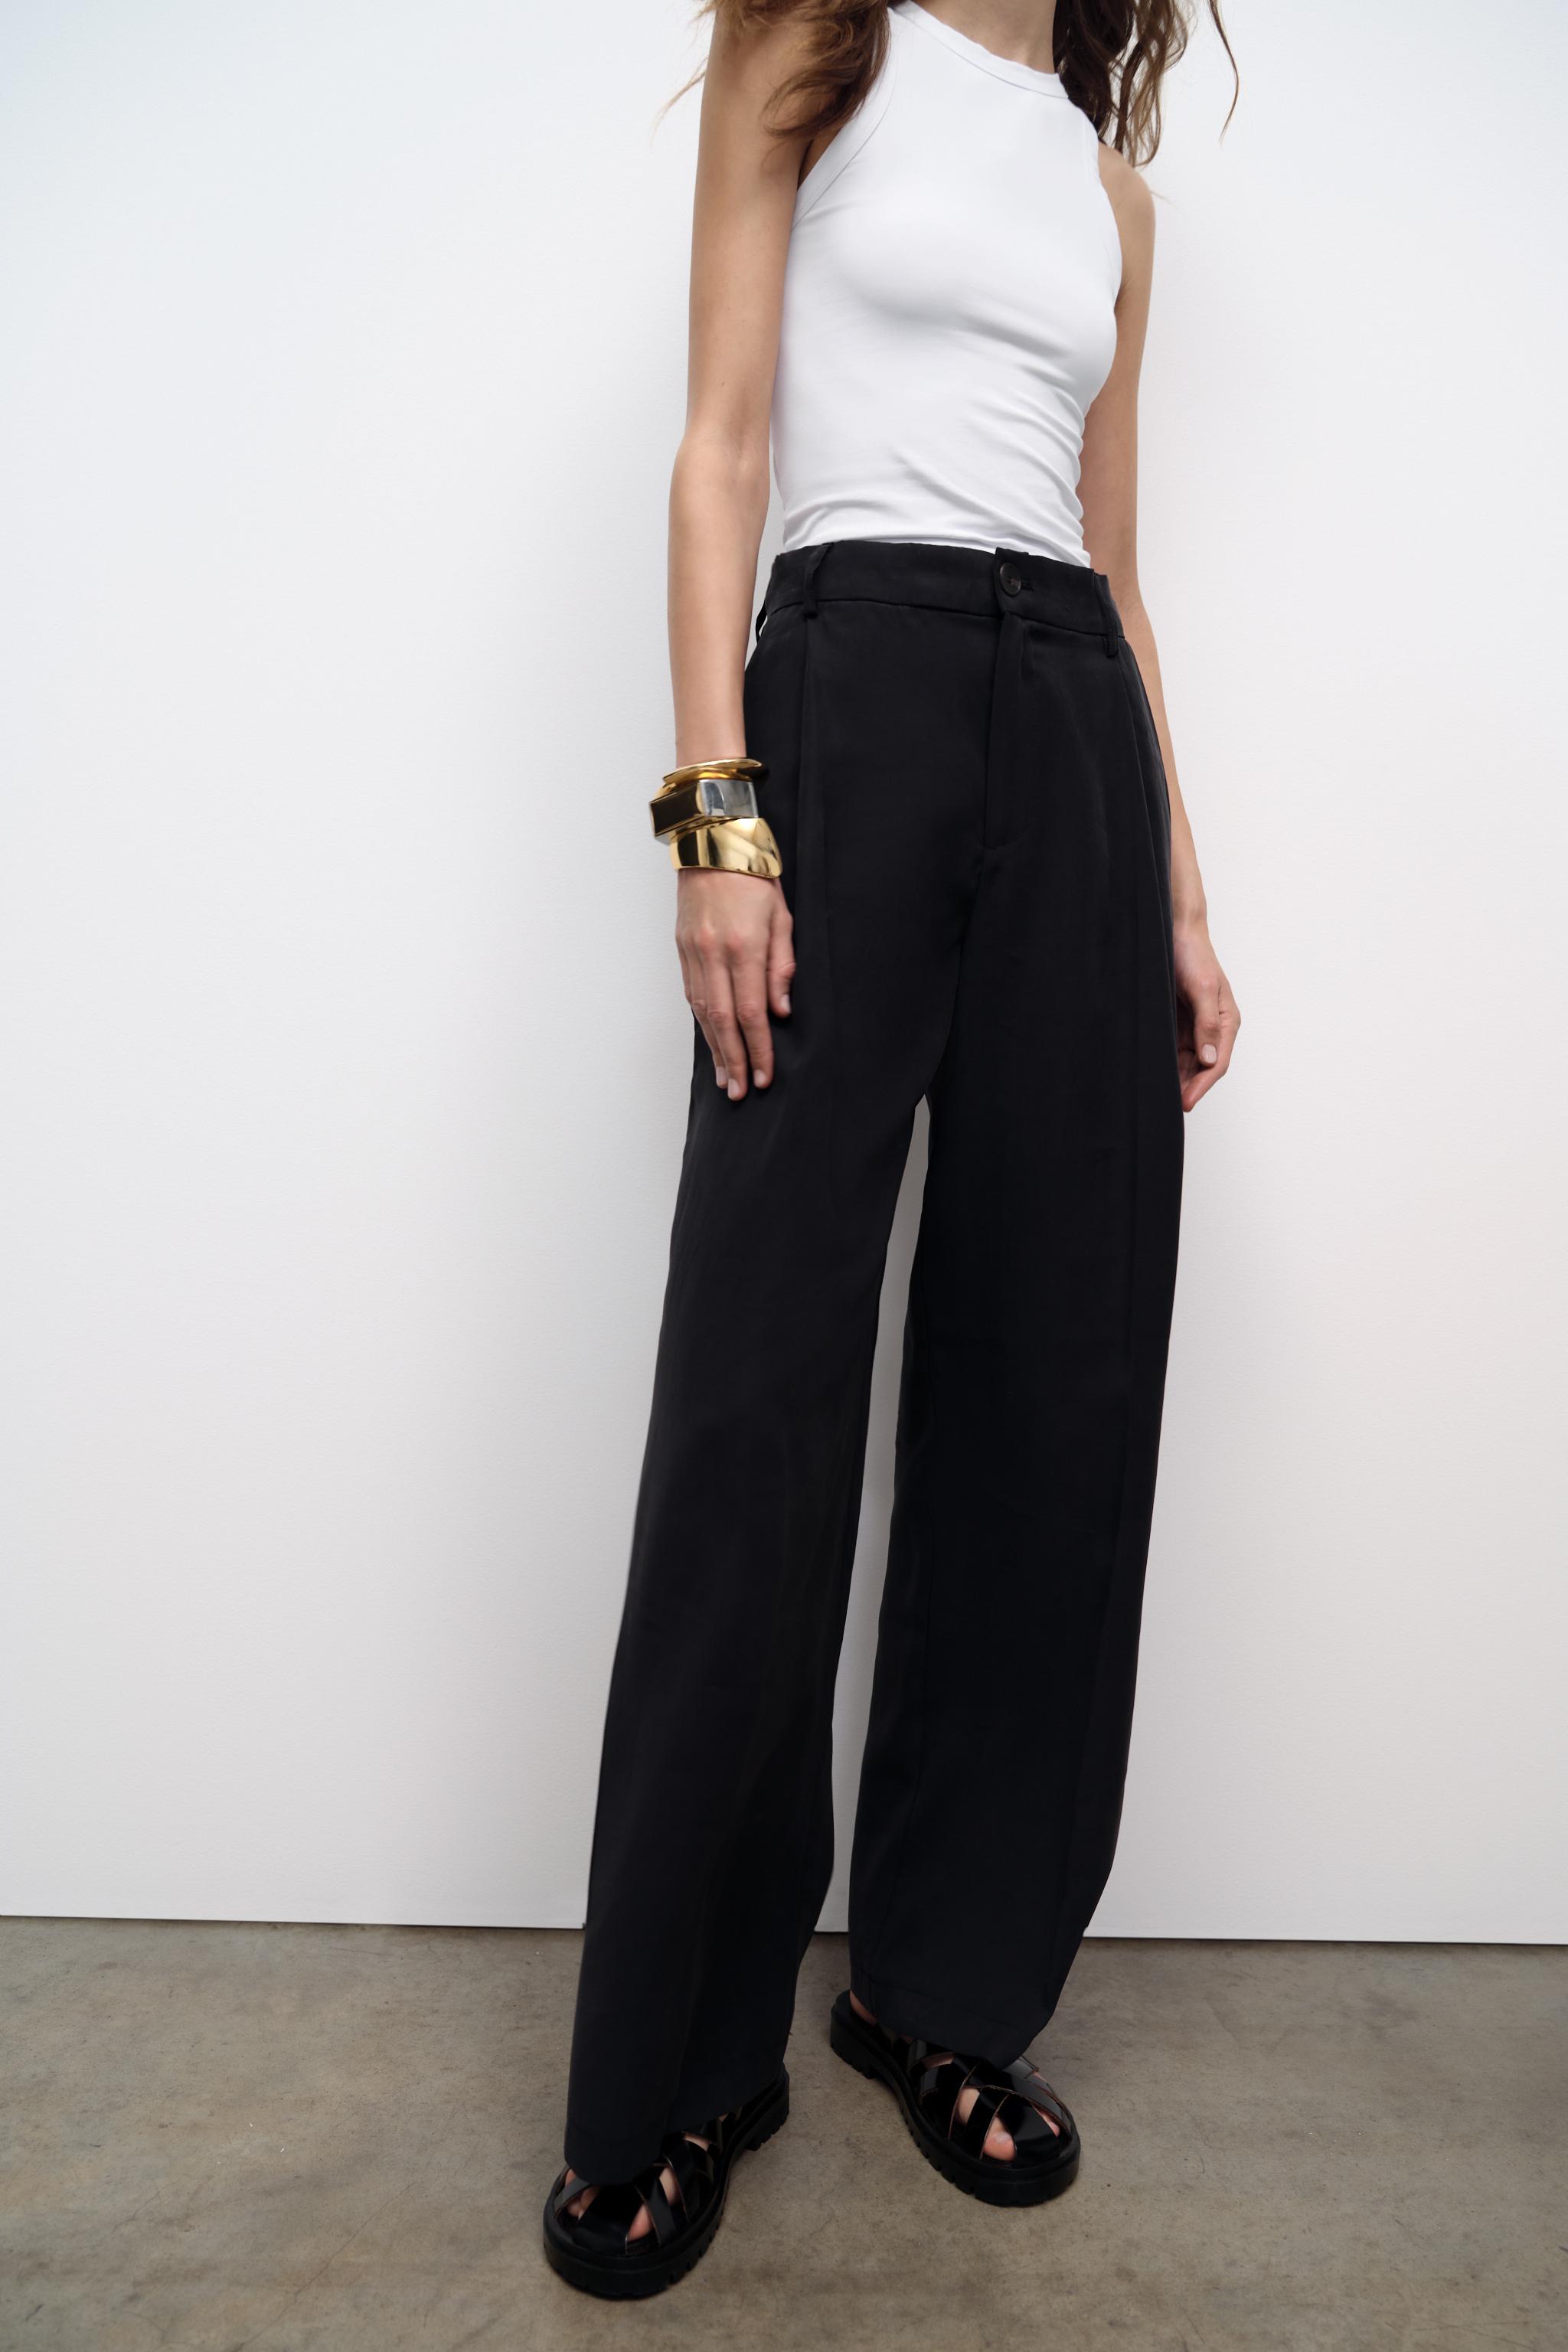 Zara Solid Black Casual Pants Size XL - 47% off